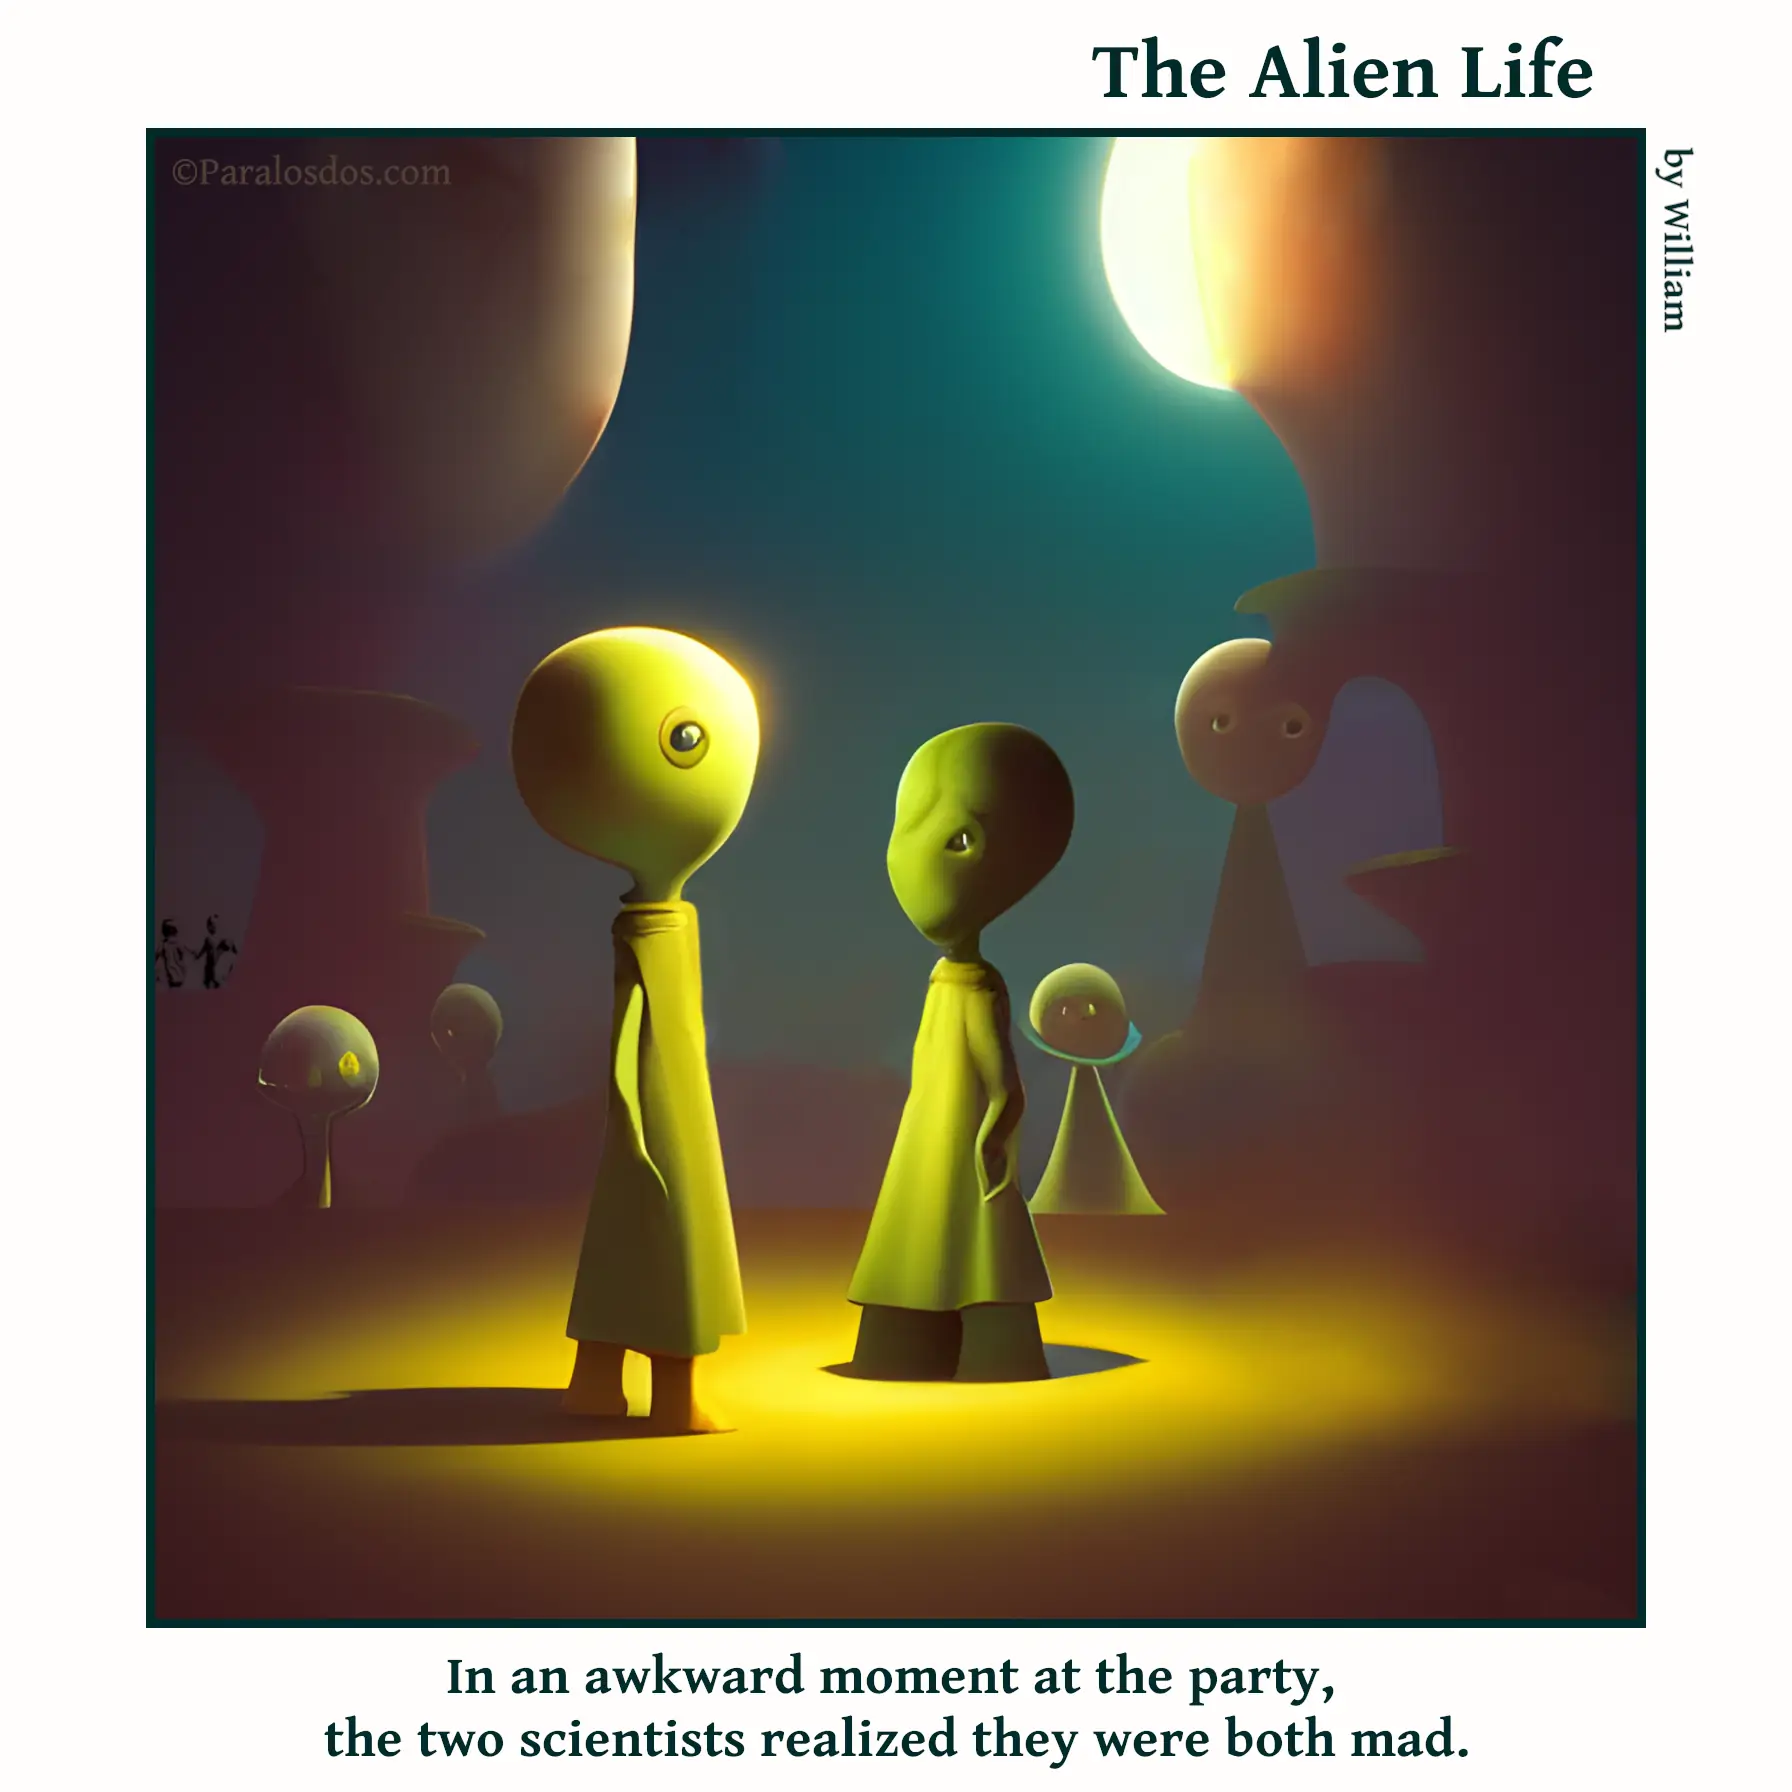 The Alien Life, one panel Comic. Two aliens that look like scientists stand facing each other at a party. The caption reads: In an awkward moment at the party, the two scientists realized they were both mad.